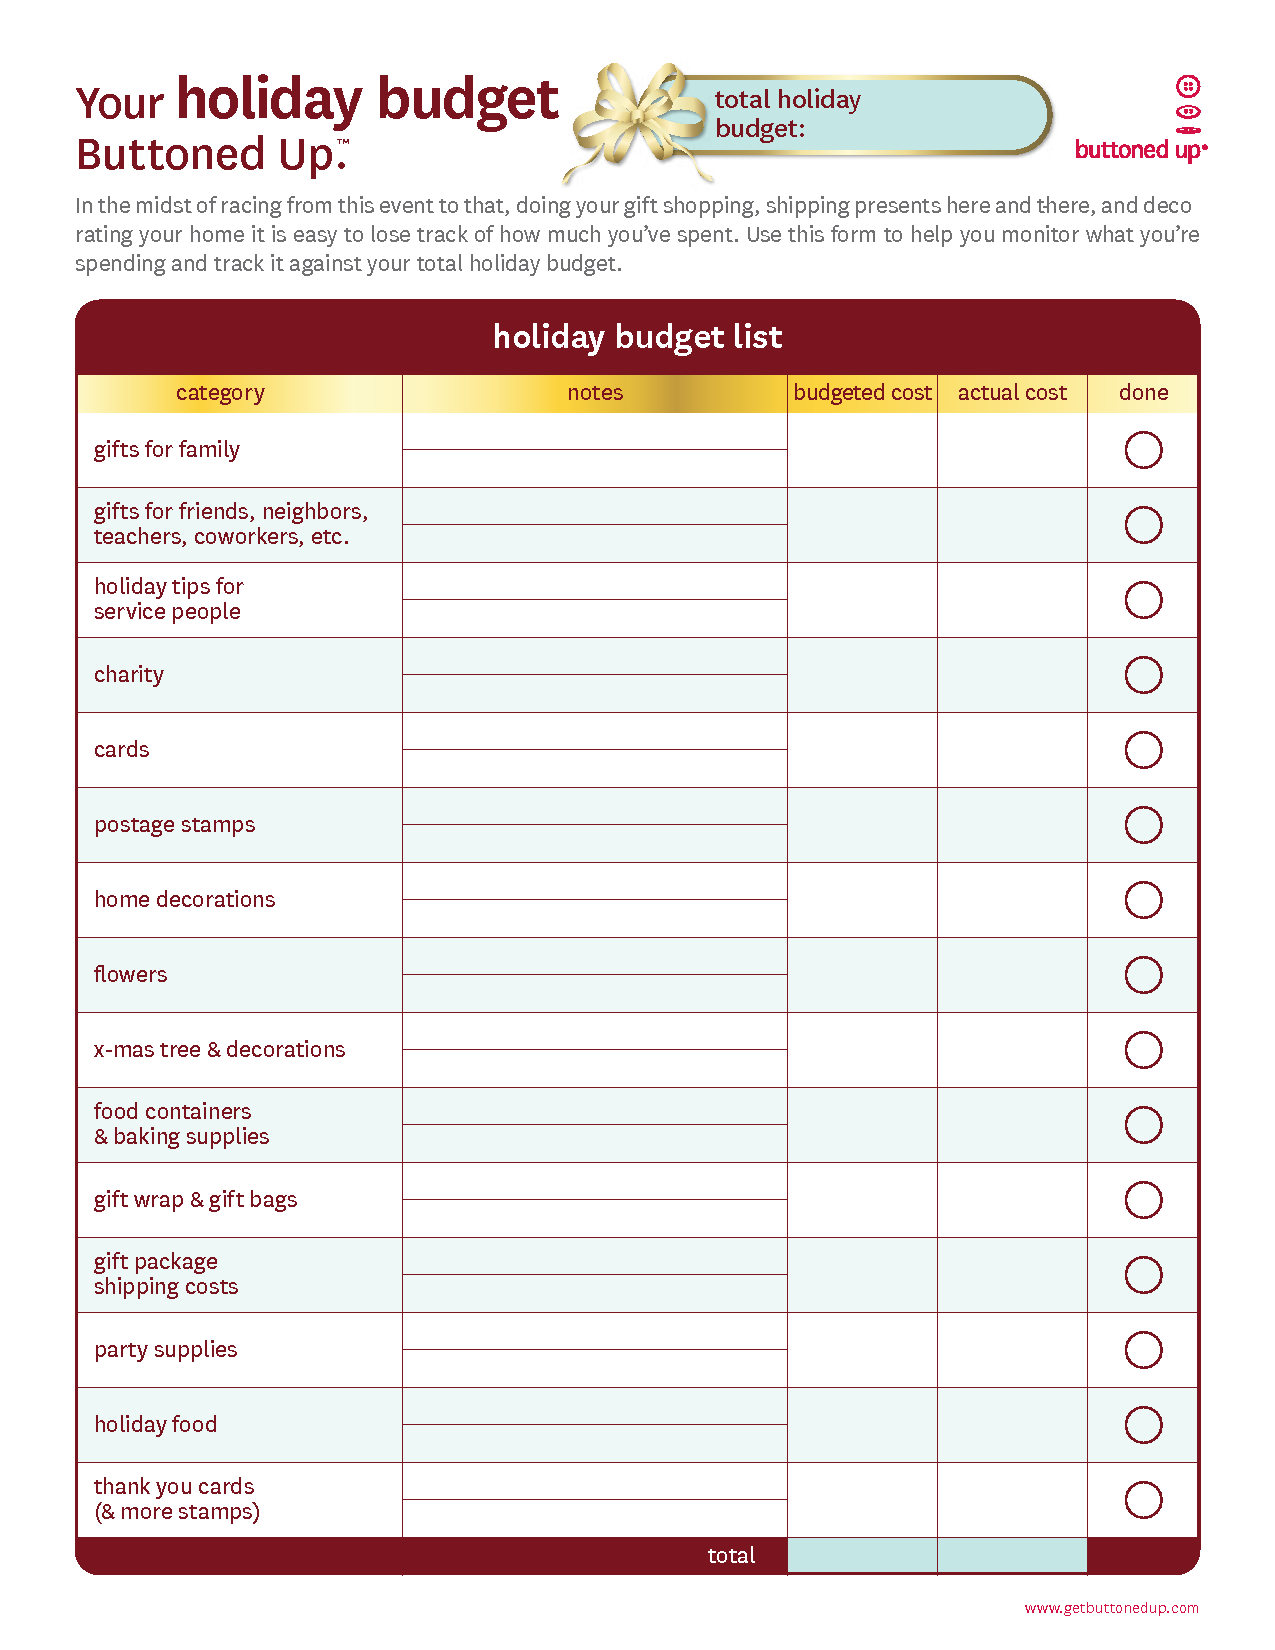 Free+Printable+Budget+Forms | Budget Forms | Budget Forms, Budget - Free Printable Forms For Organizing